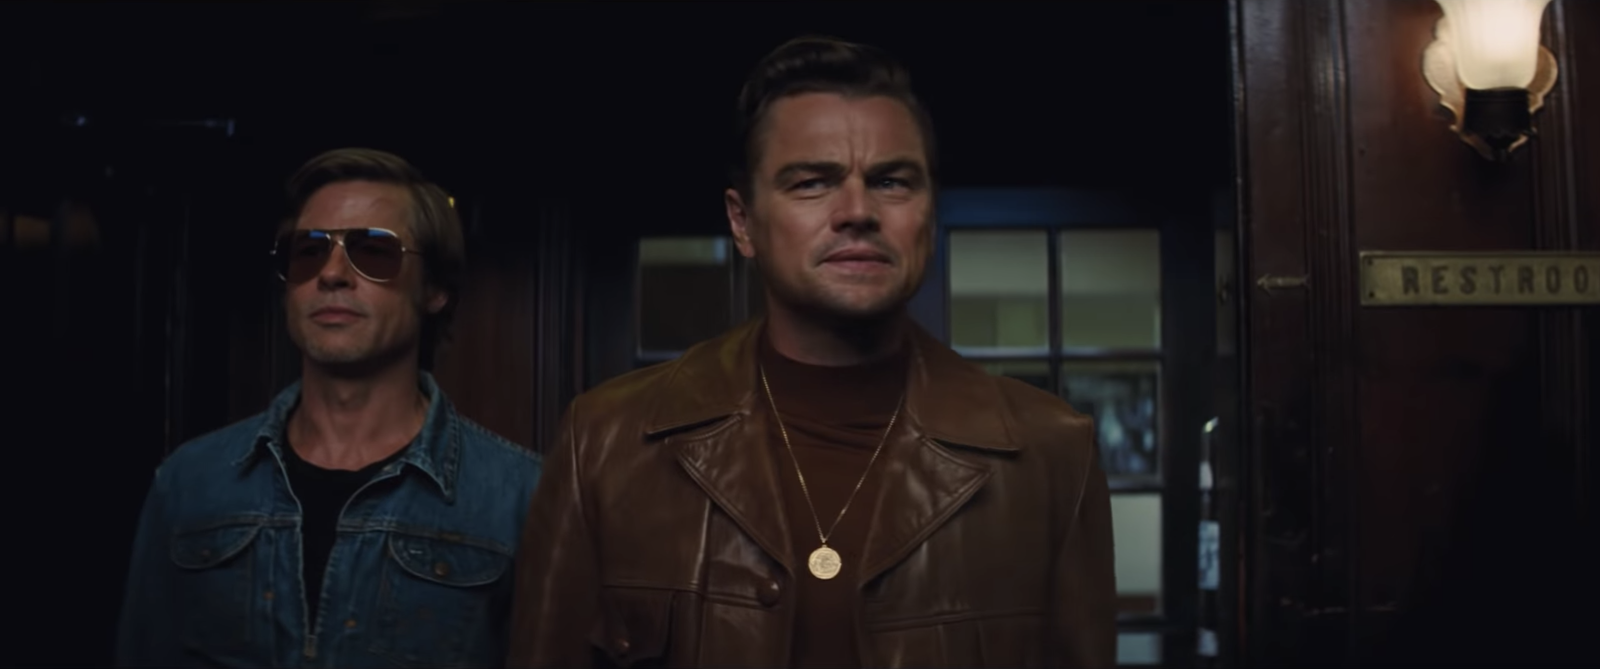 once upon a time in hollywood scene 01